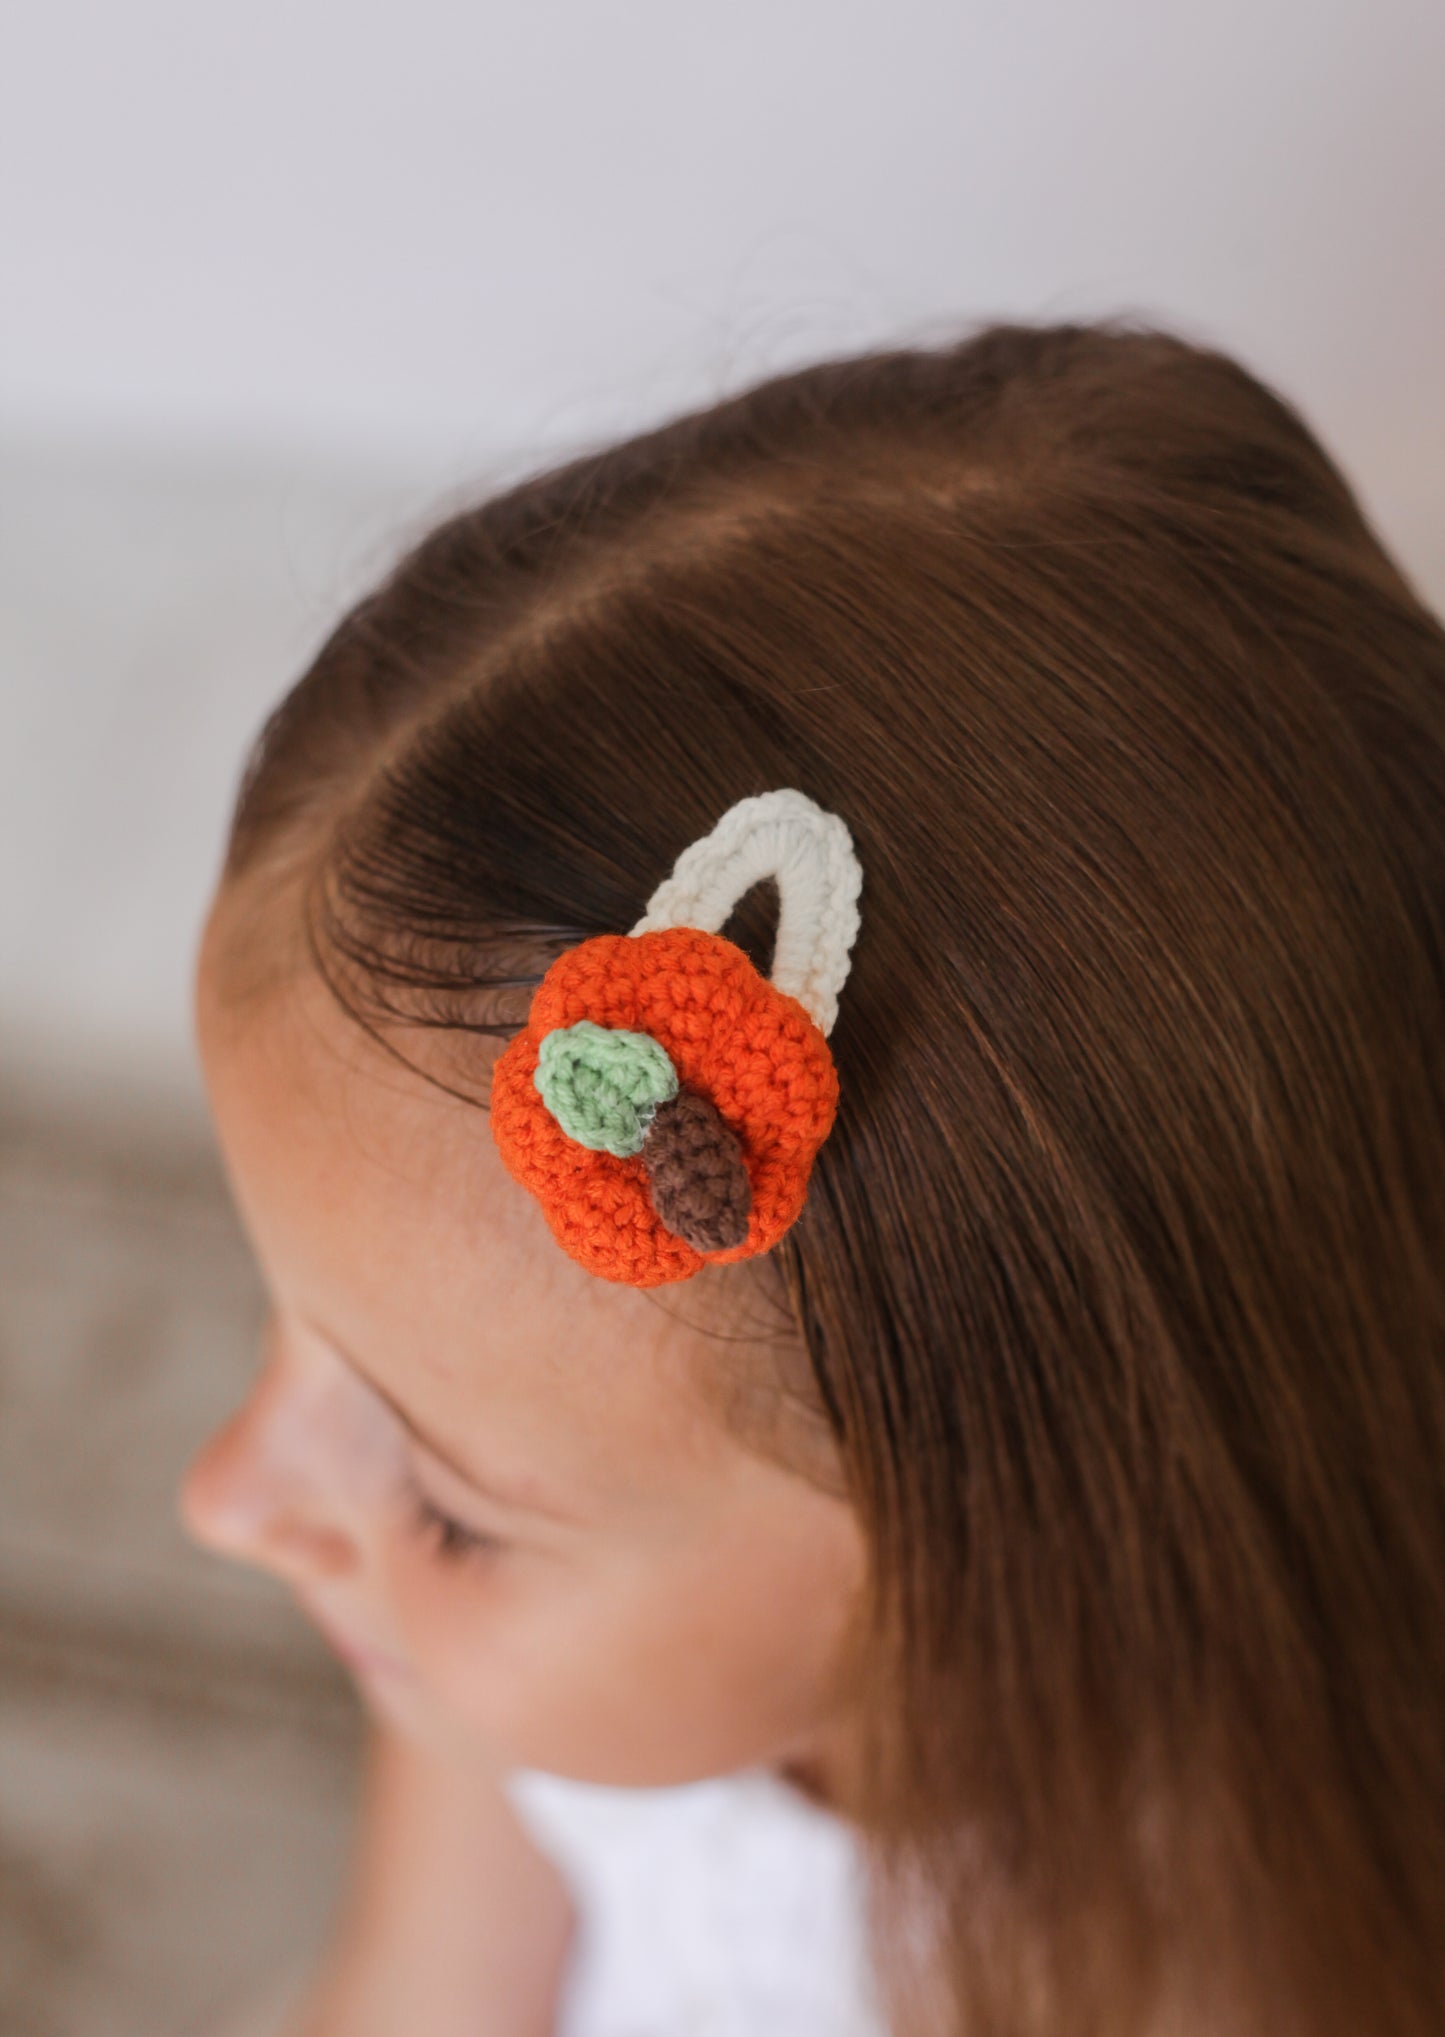 Trendy Girls' Gifts : Crochet Hair Clips . Barrettes for Teens, Granddaughters, Newborn Girl Outfits, with Embroidery Designs